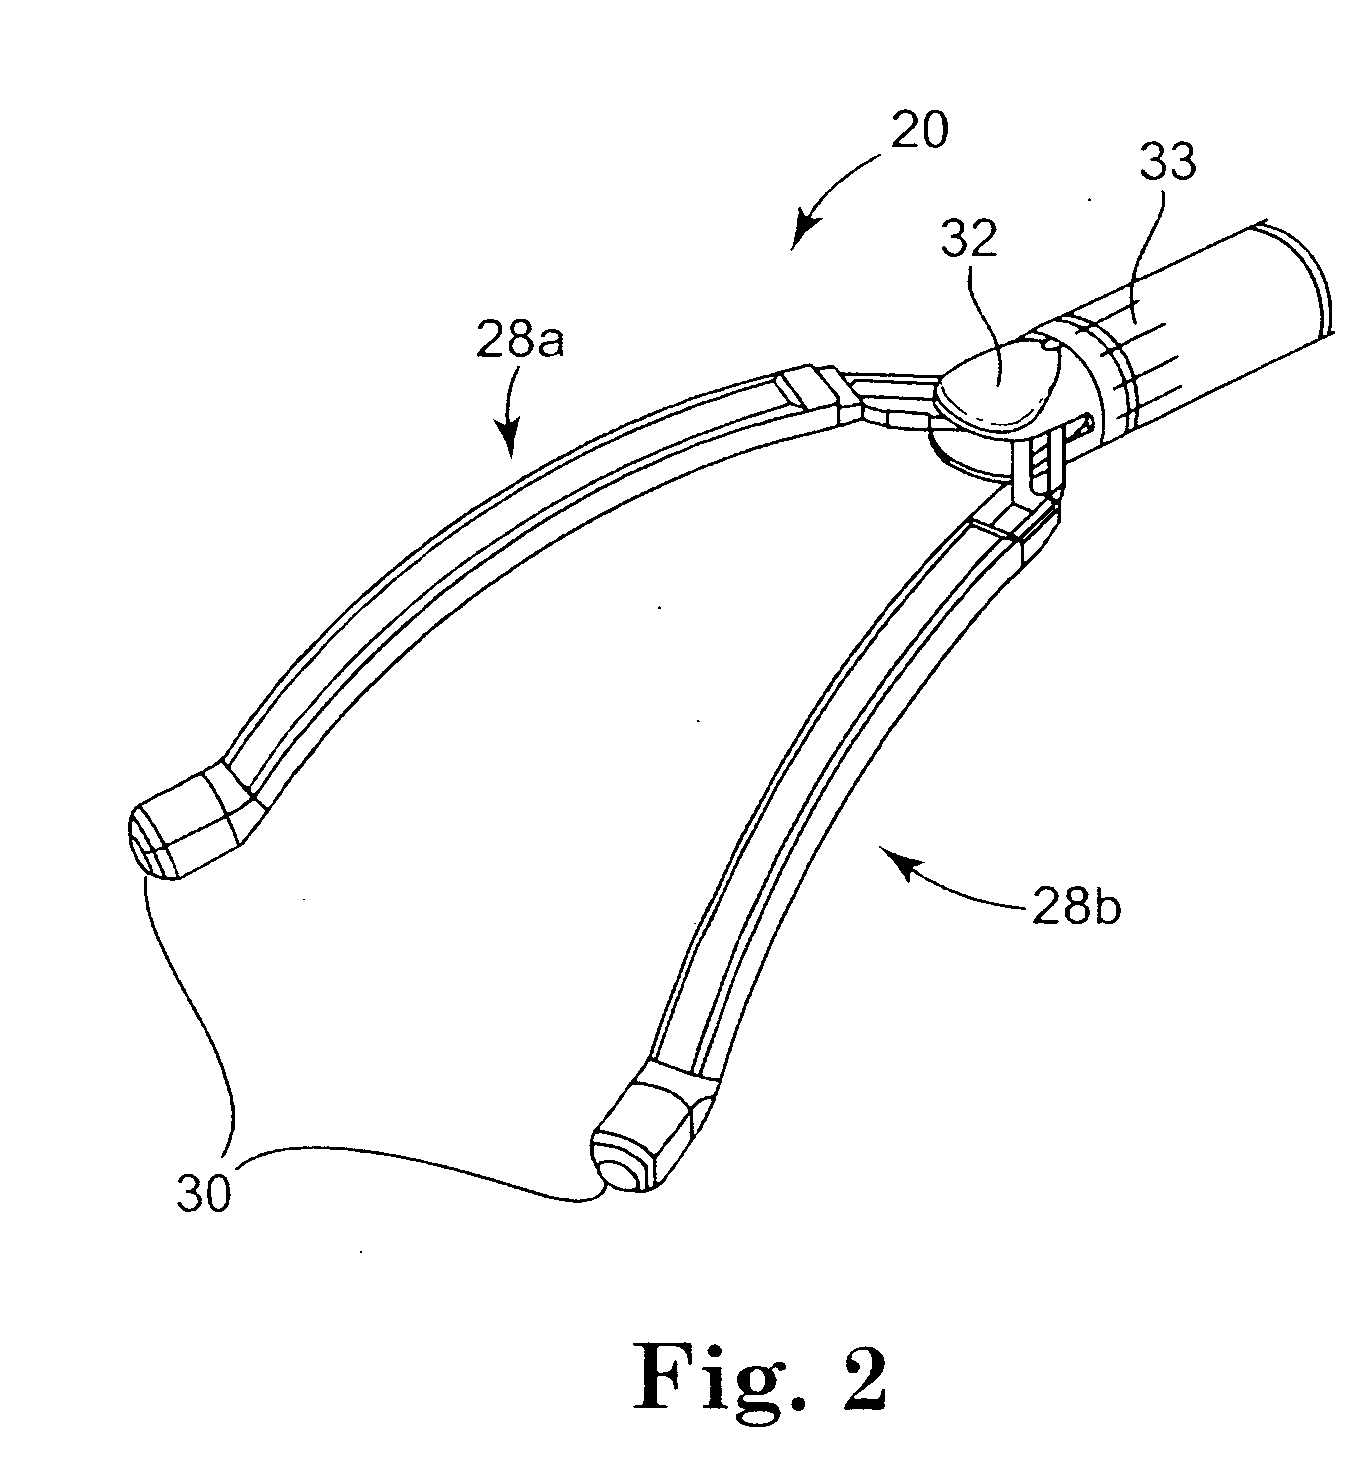 Ablation device with lockout feature